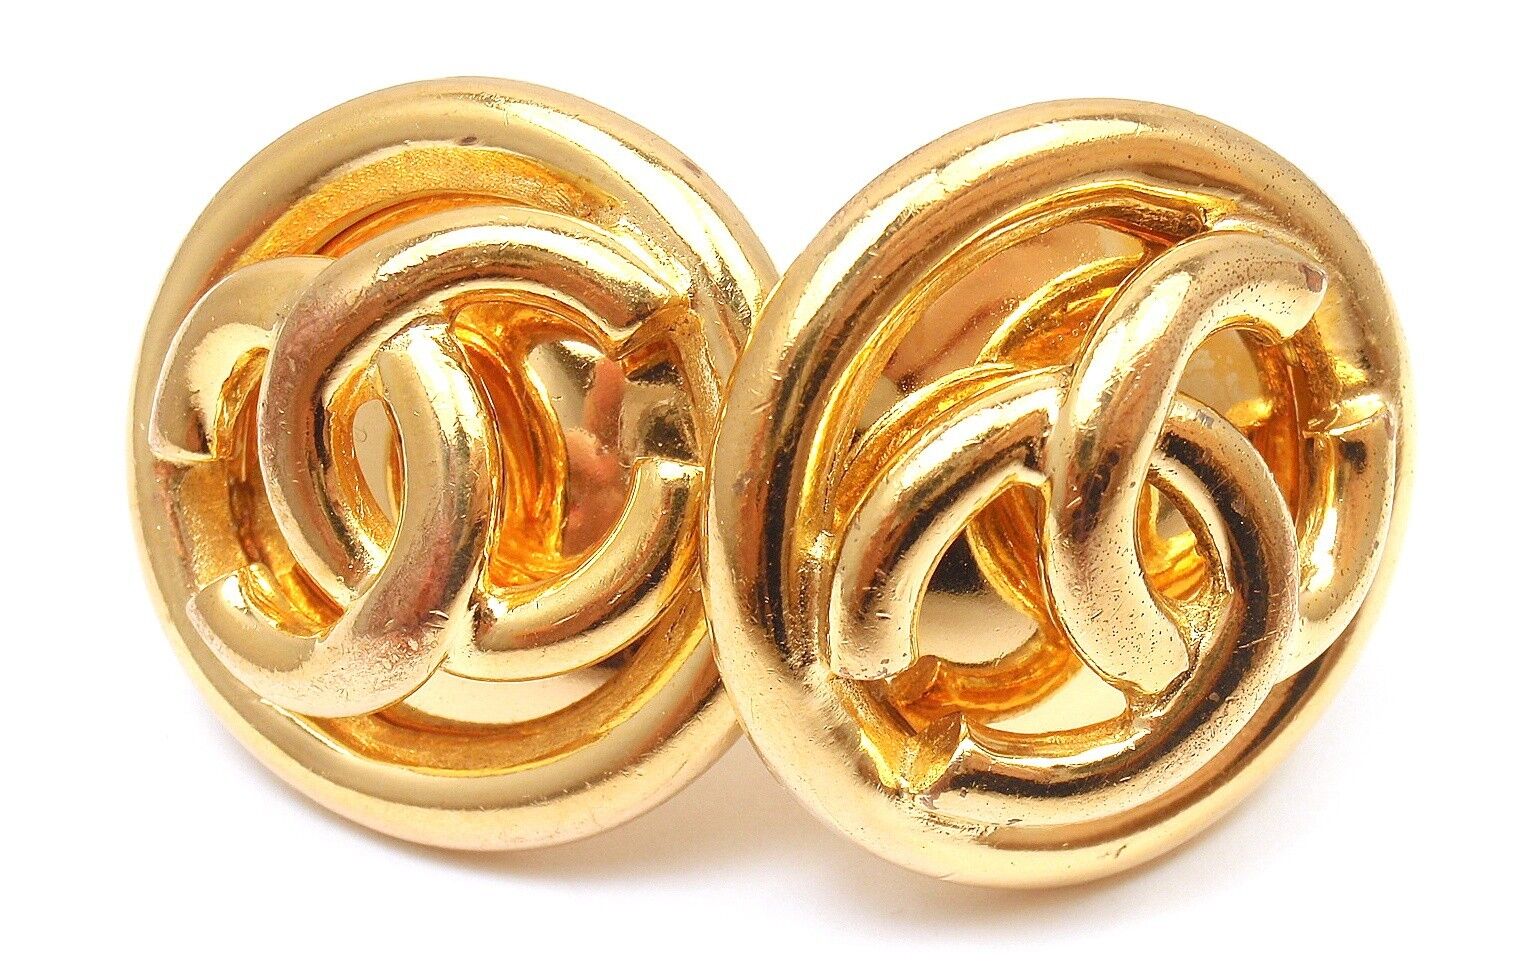 Authentic! Chanel Gold Tone CC Logo Simple Classic Clip-On Large Earrings